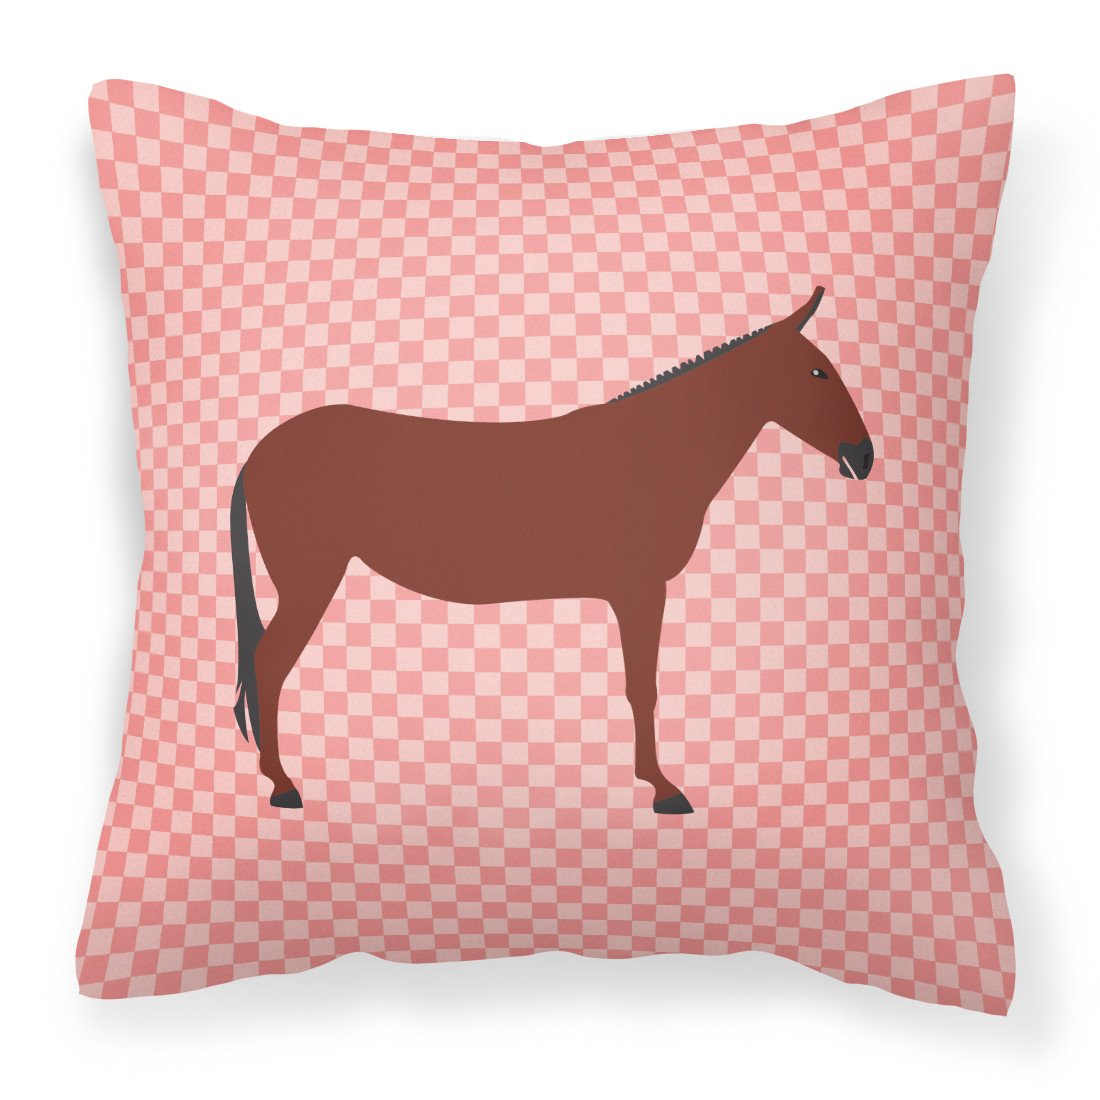 Hinny Horse Donkey Pink Check Fabric Decorative Pillow BB7850PW1818 by Caroline's Treasures